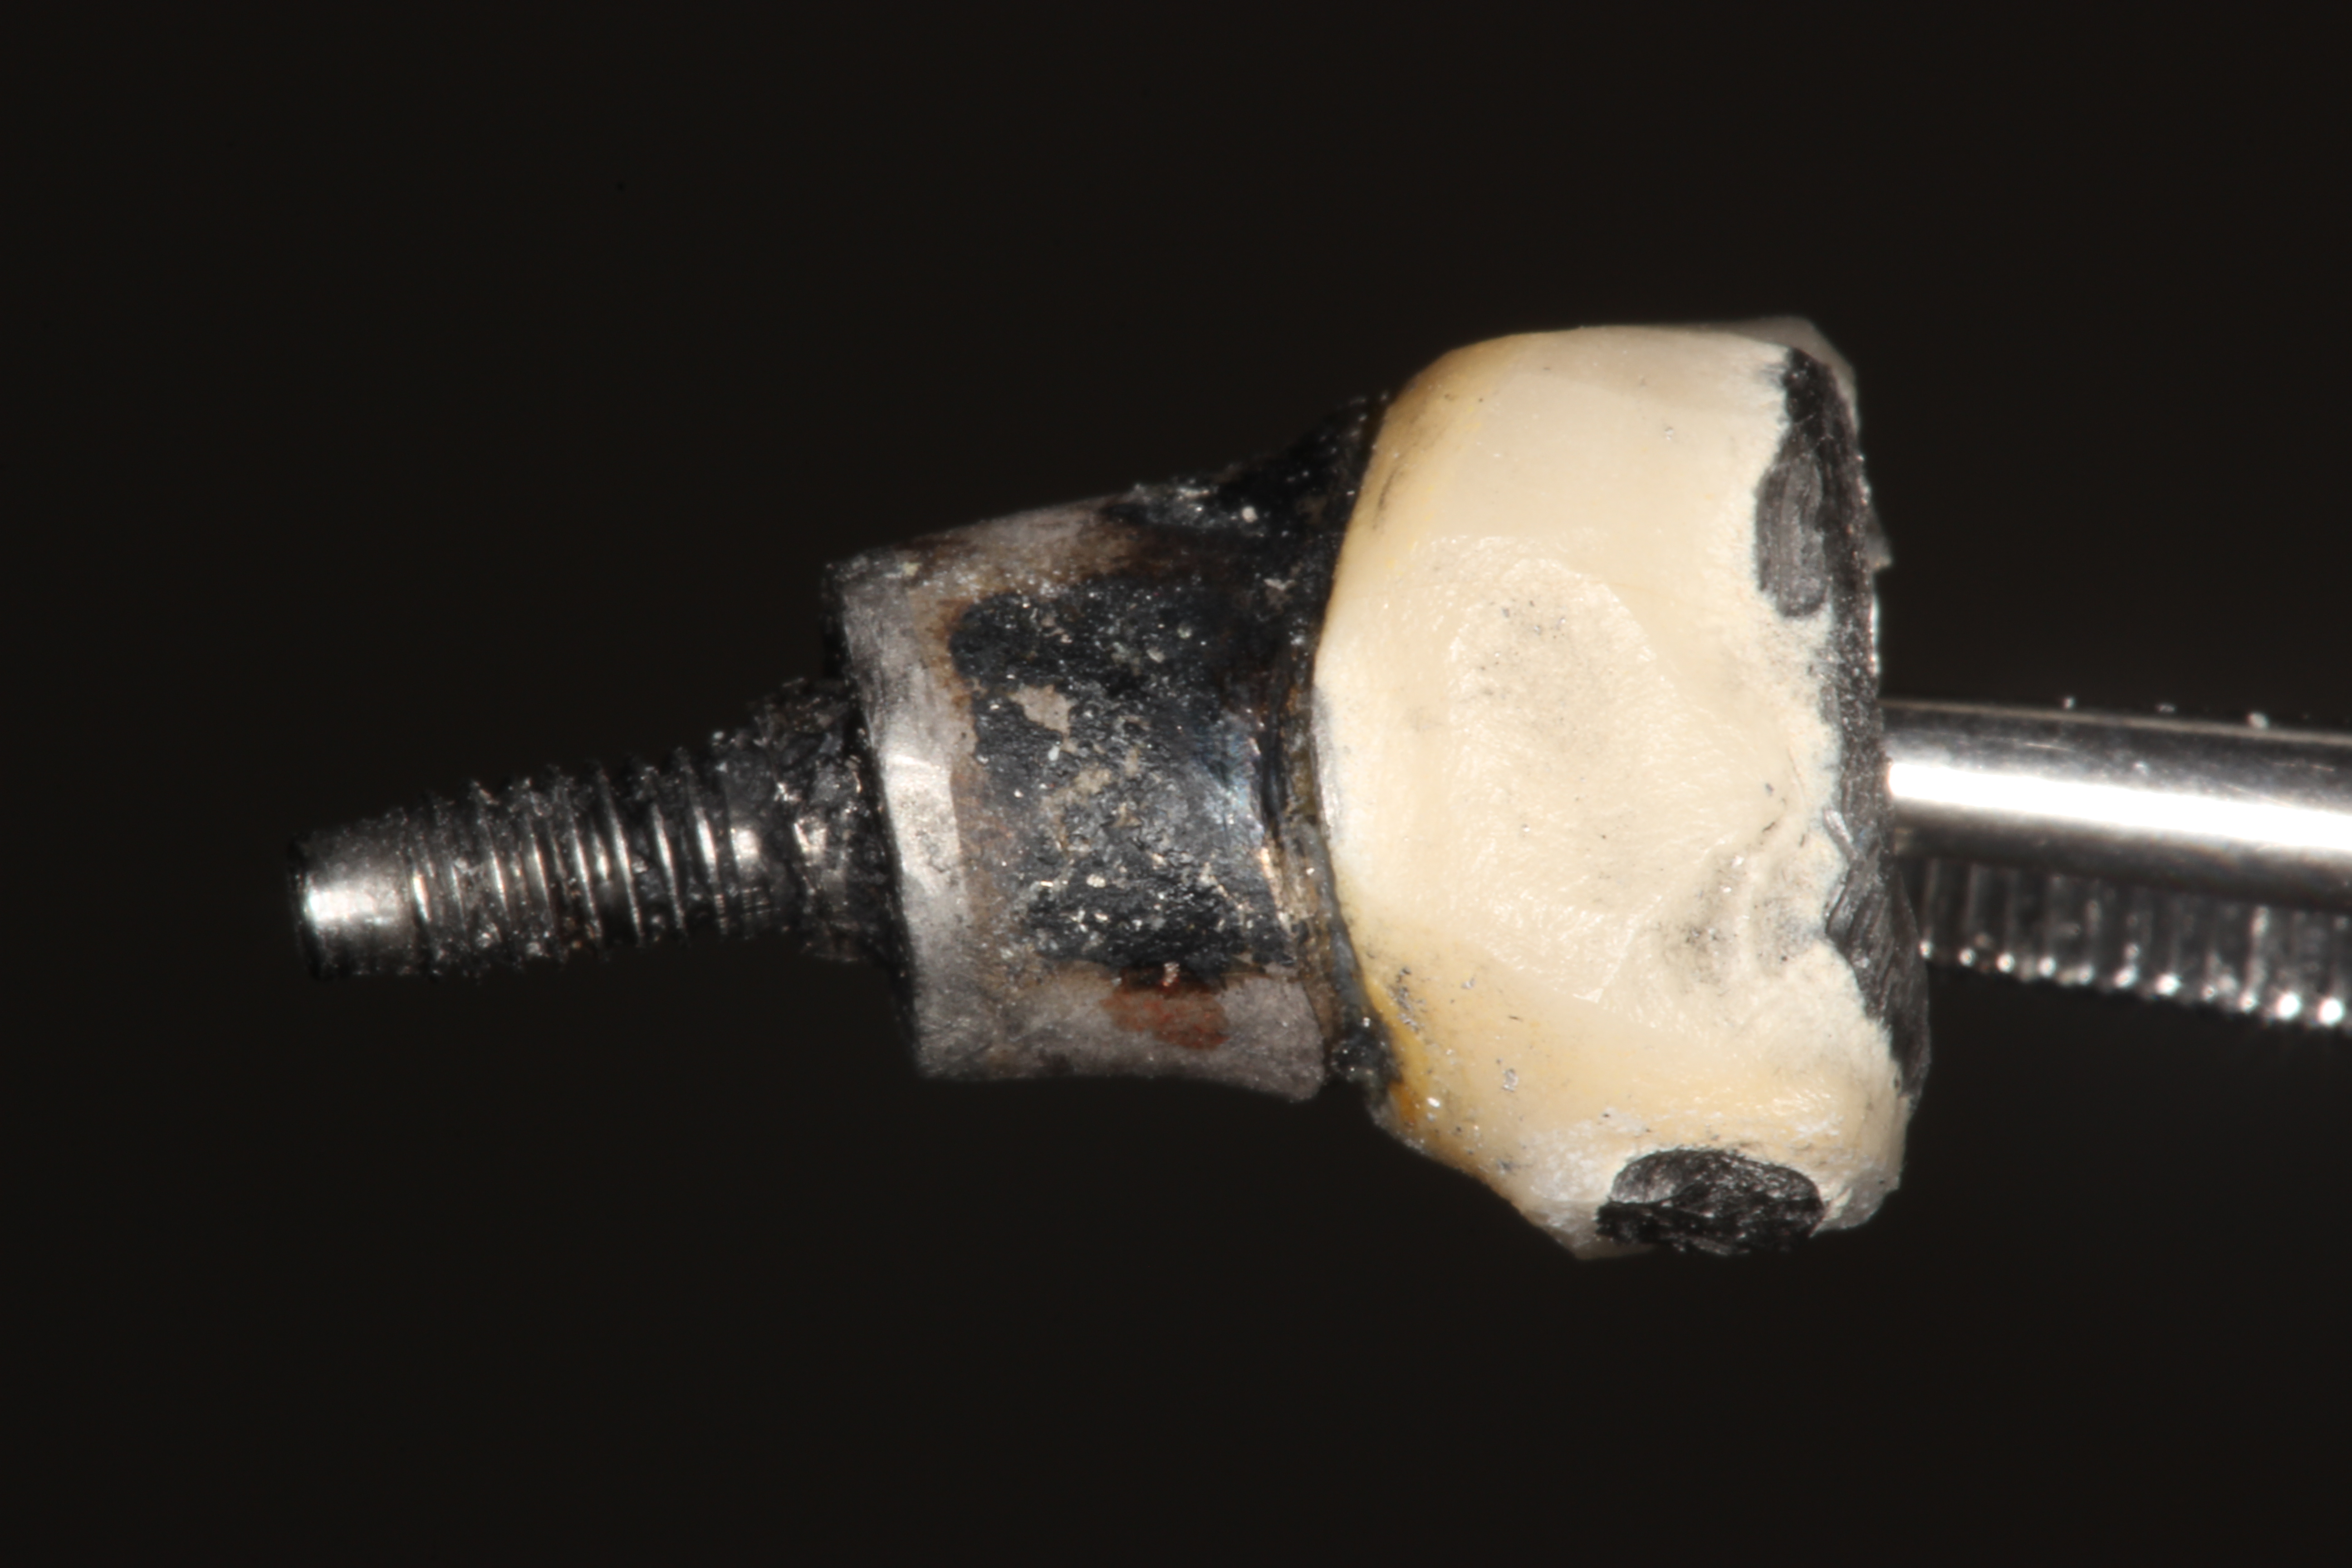 Example of low-quality implants installed in Mexico. It didn't last long and came out.